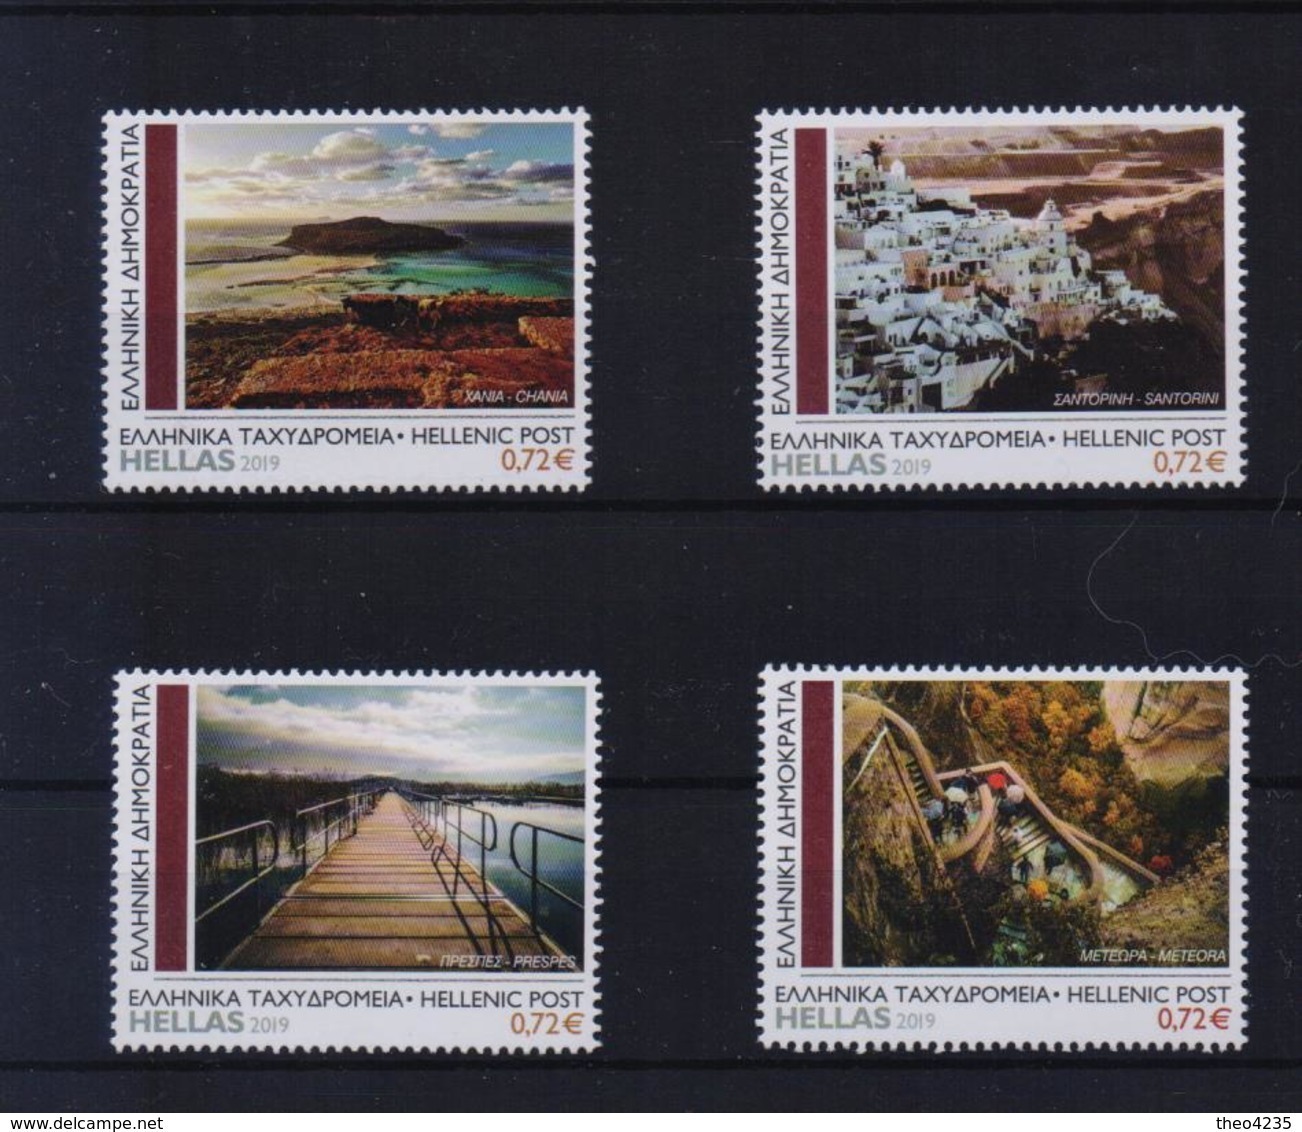 GREECE STAMPS 2019 /INTERNATIONAL EXHIBITION MILANOFIL 2019(without Folder)-MNH-COMPLETE SET - Unused Stamps